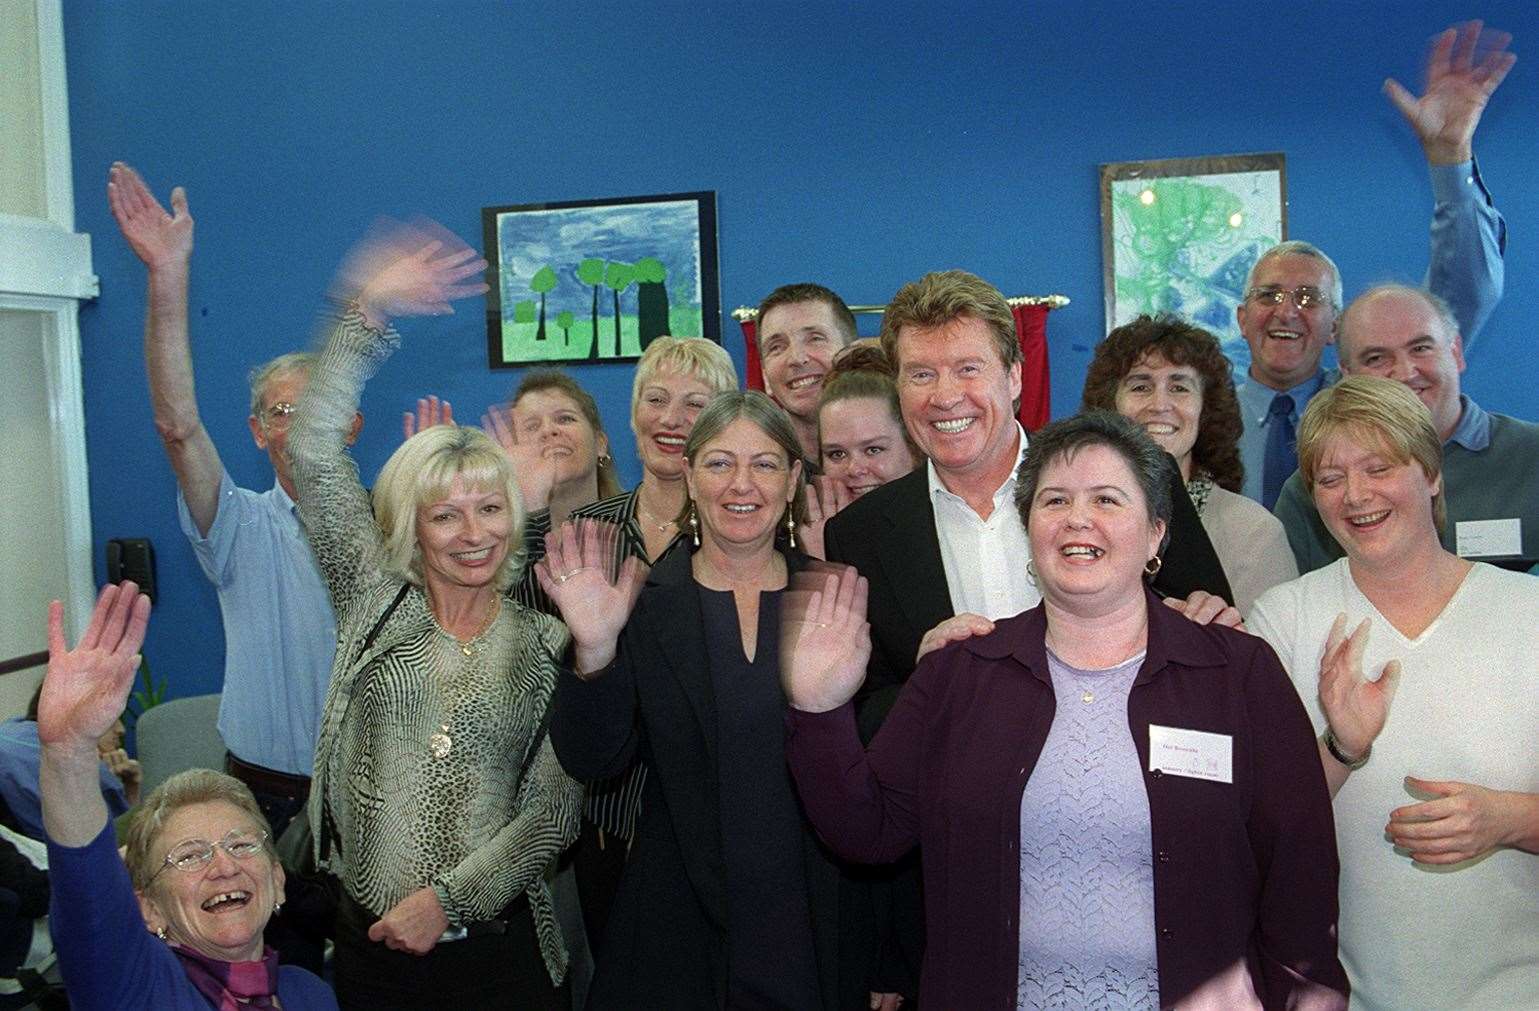 Michael Crawford opened the Crawford Centre in Sheerness in November 2001